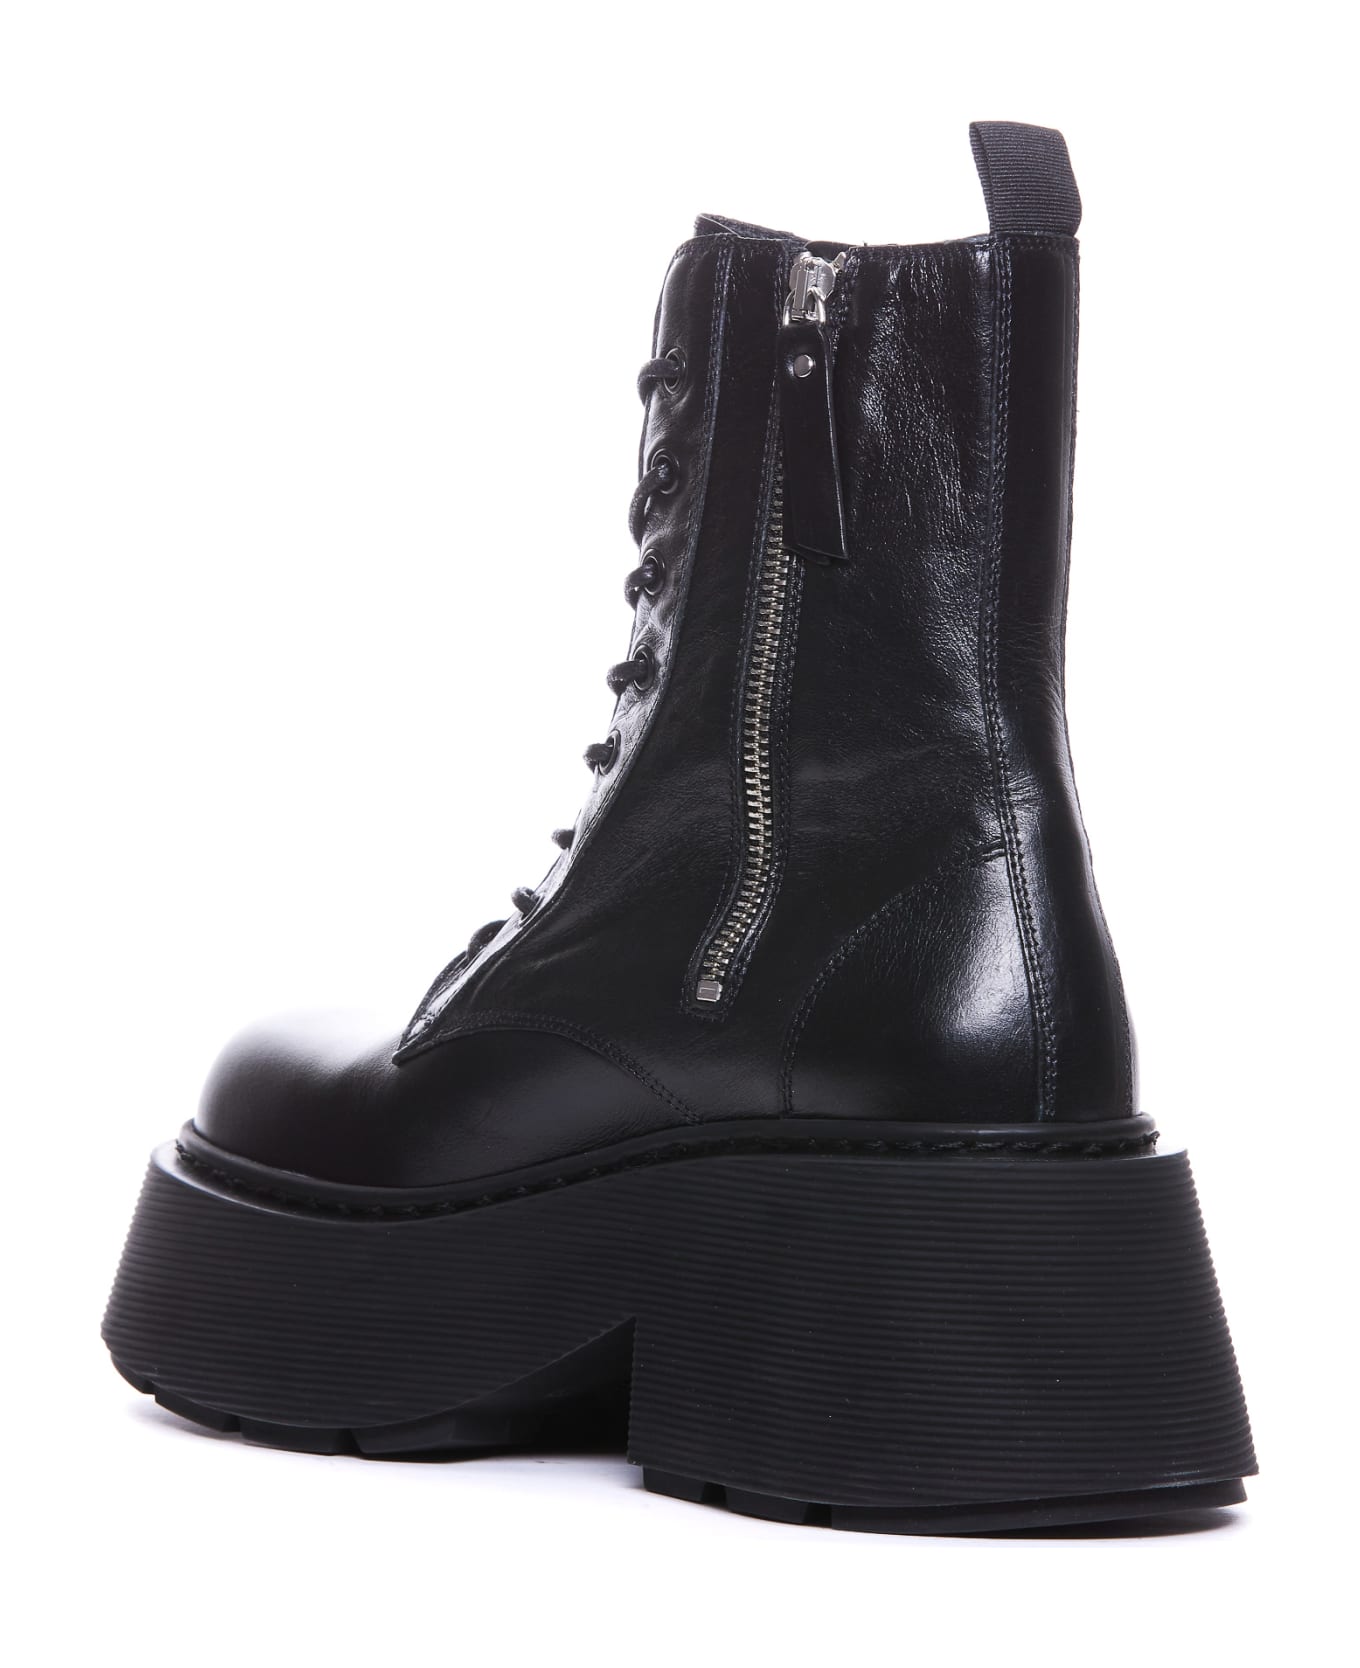 Vic Matié Mayon Ankle Boots - Black ブーツ